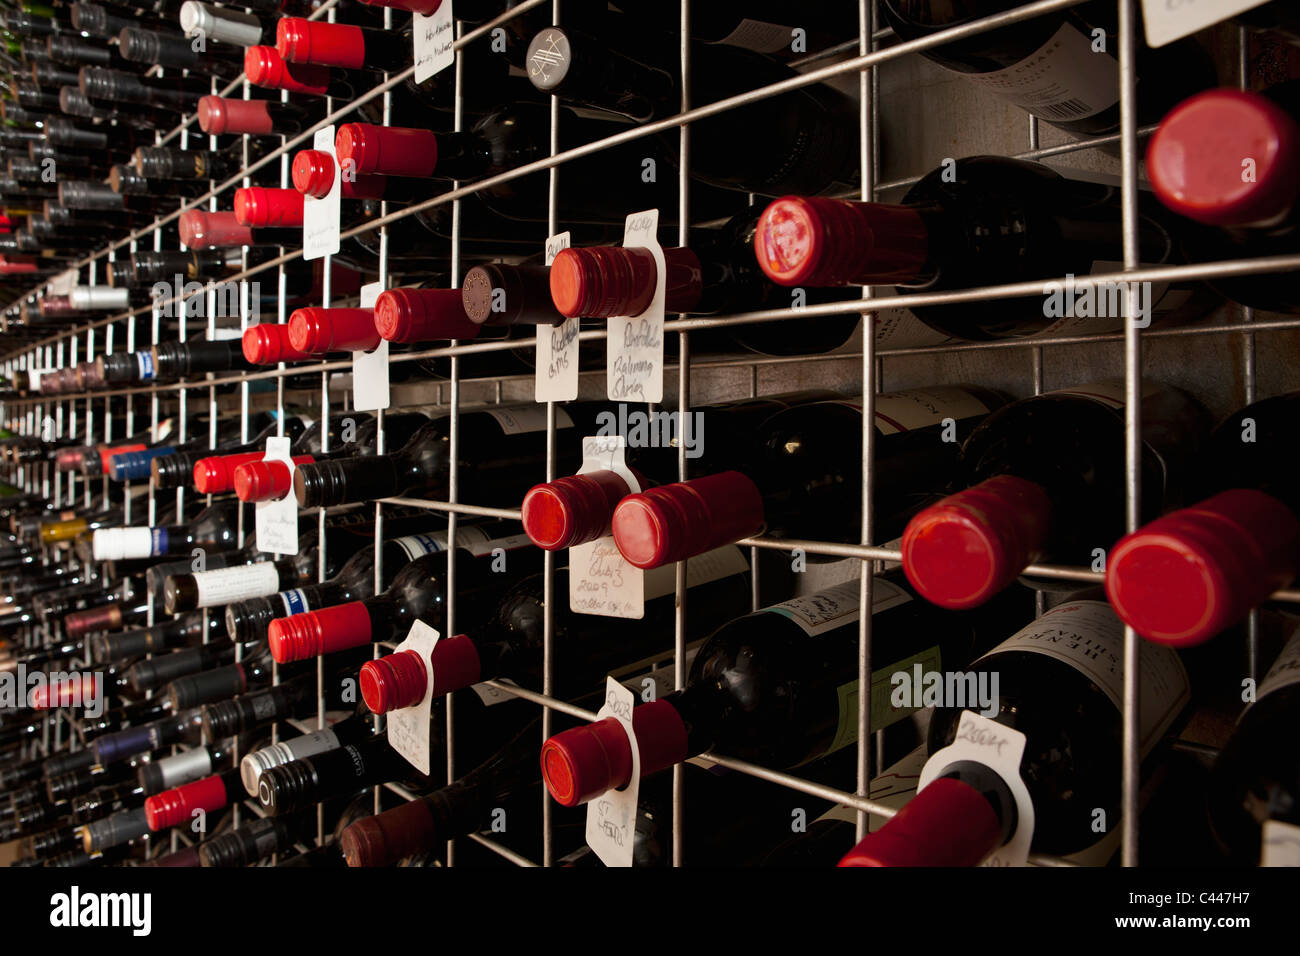 Bottles of wine in a cellar Stock Photo